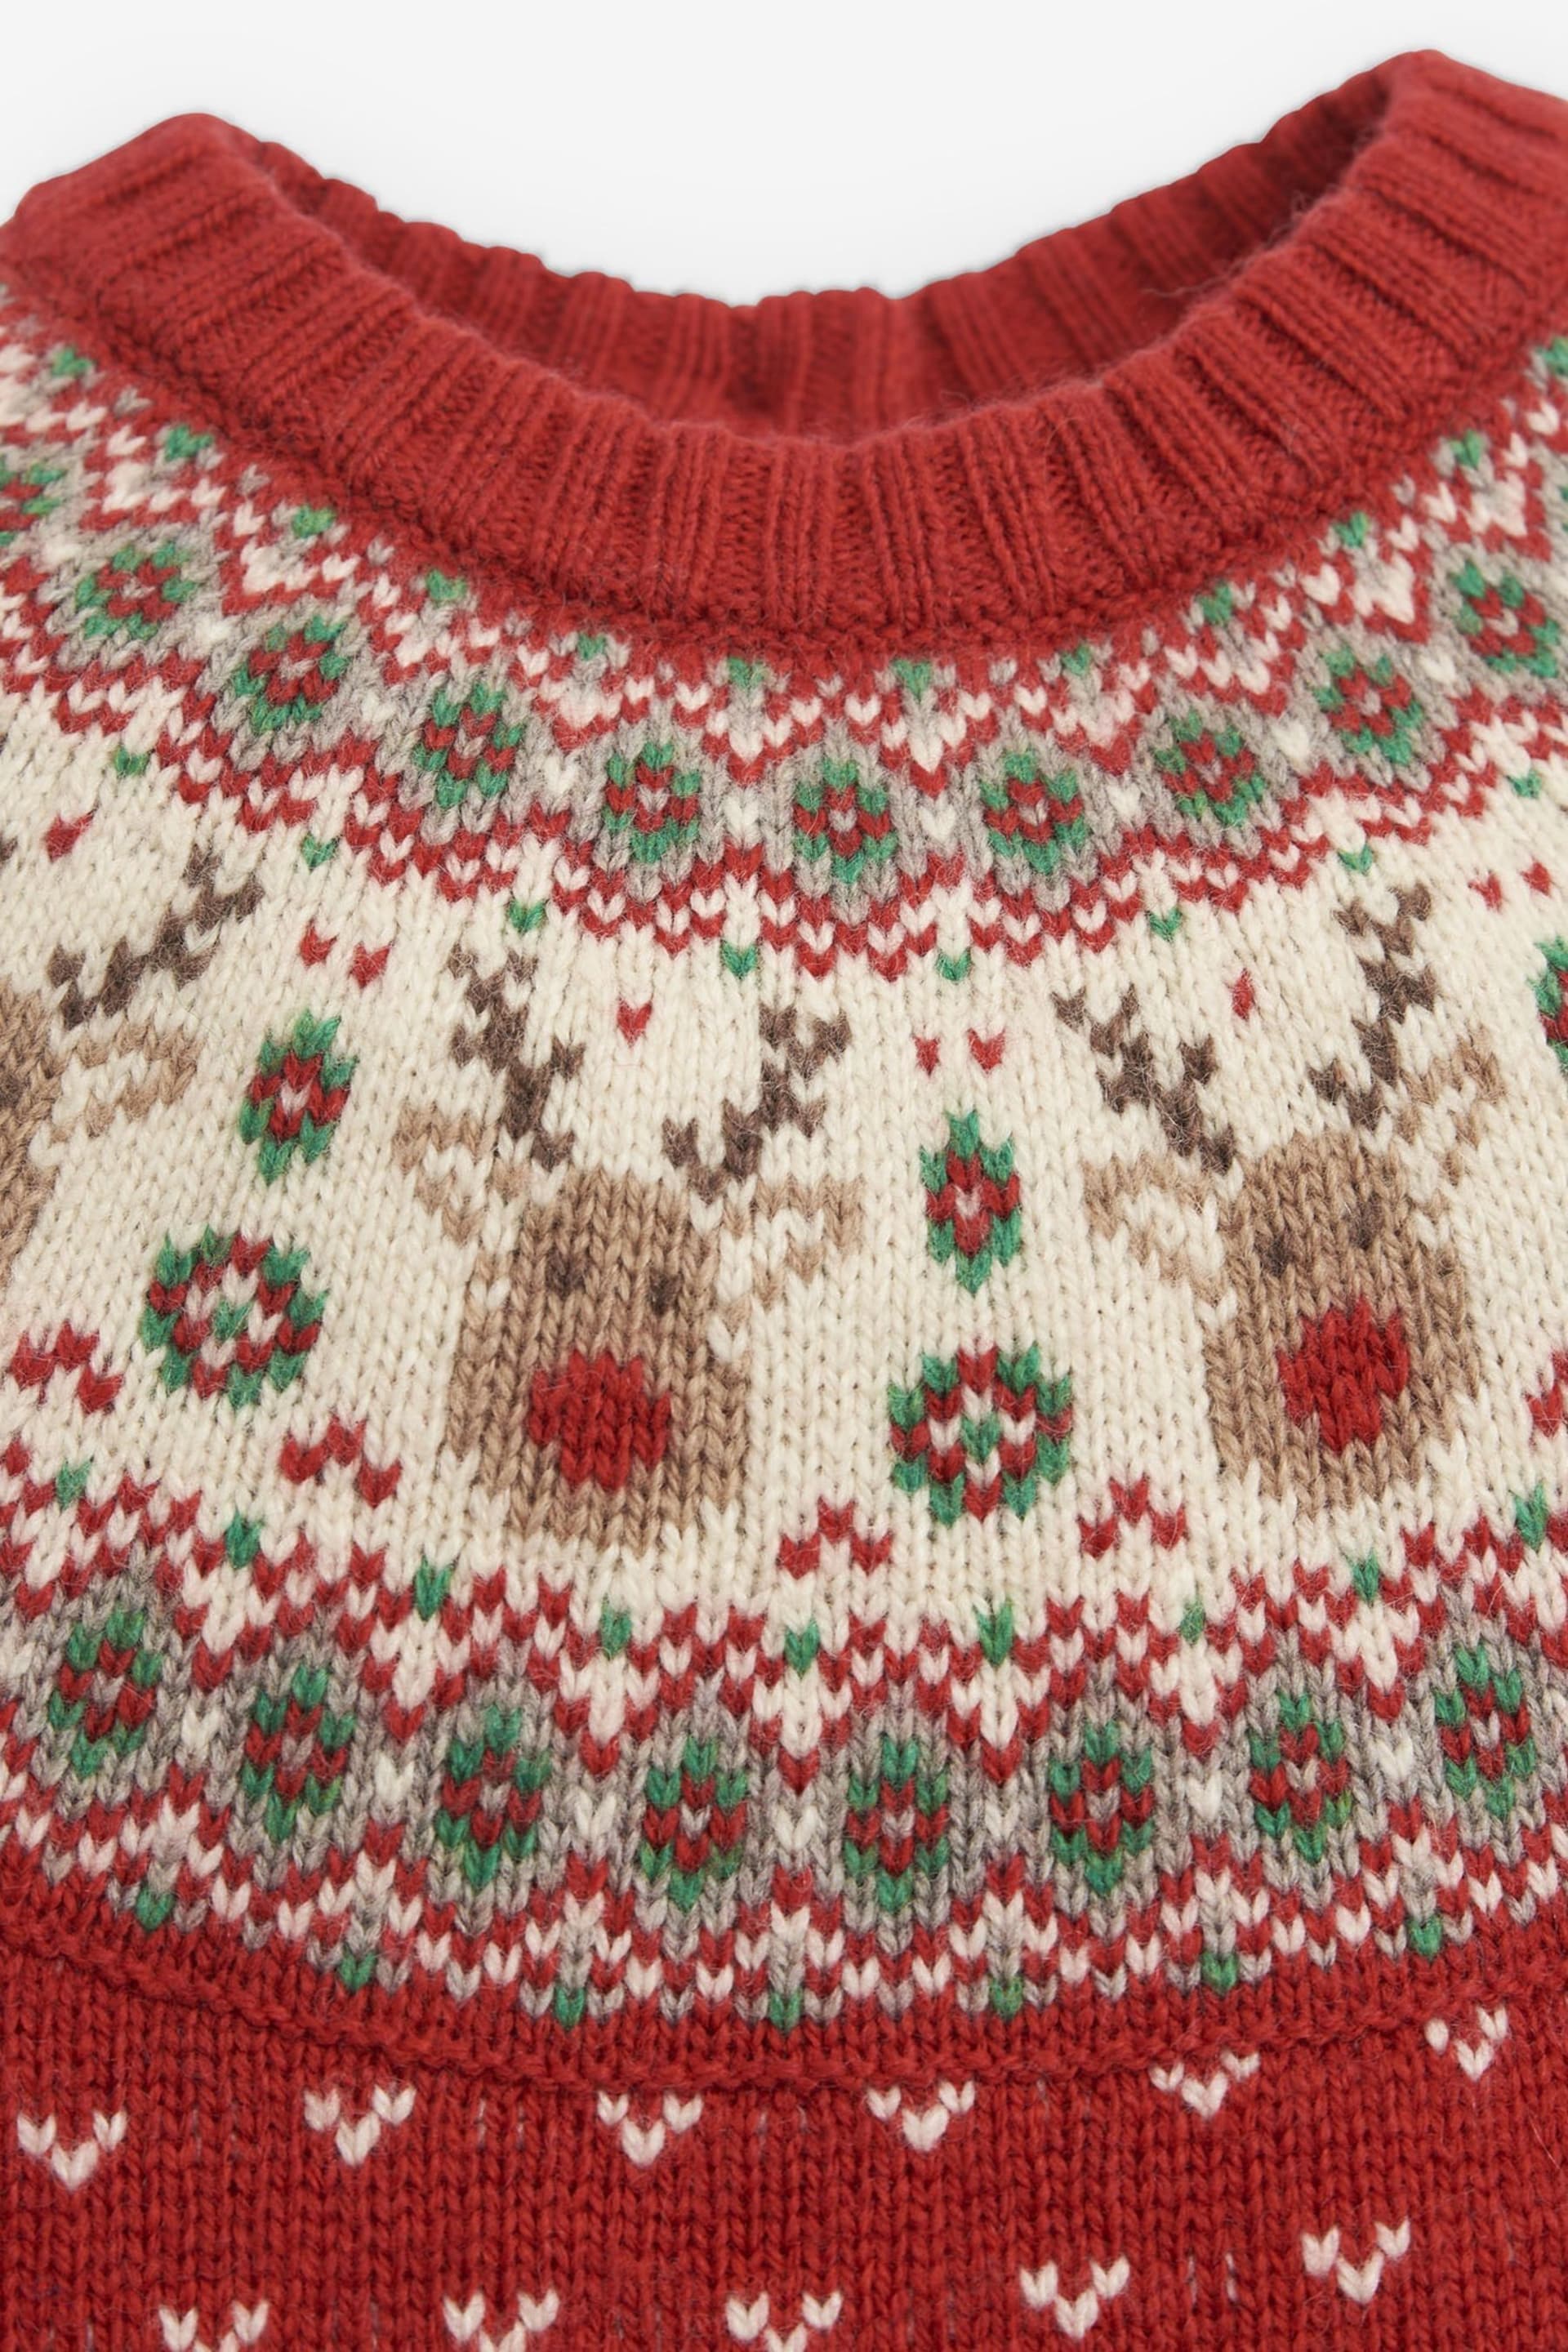 JoJo Maman Bébé Red Reindeer Fair Isle Knitted Baby All-In-One - Image 4 of 4